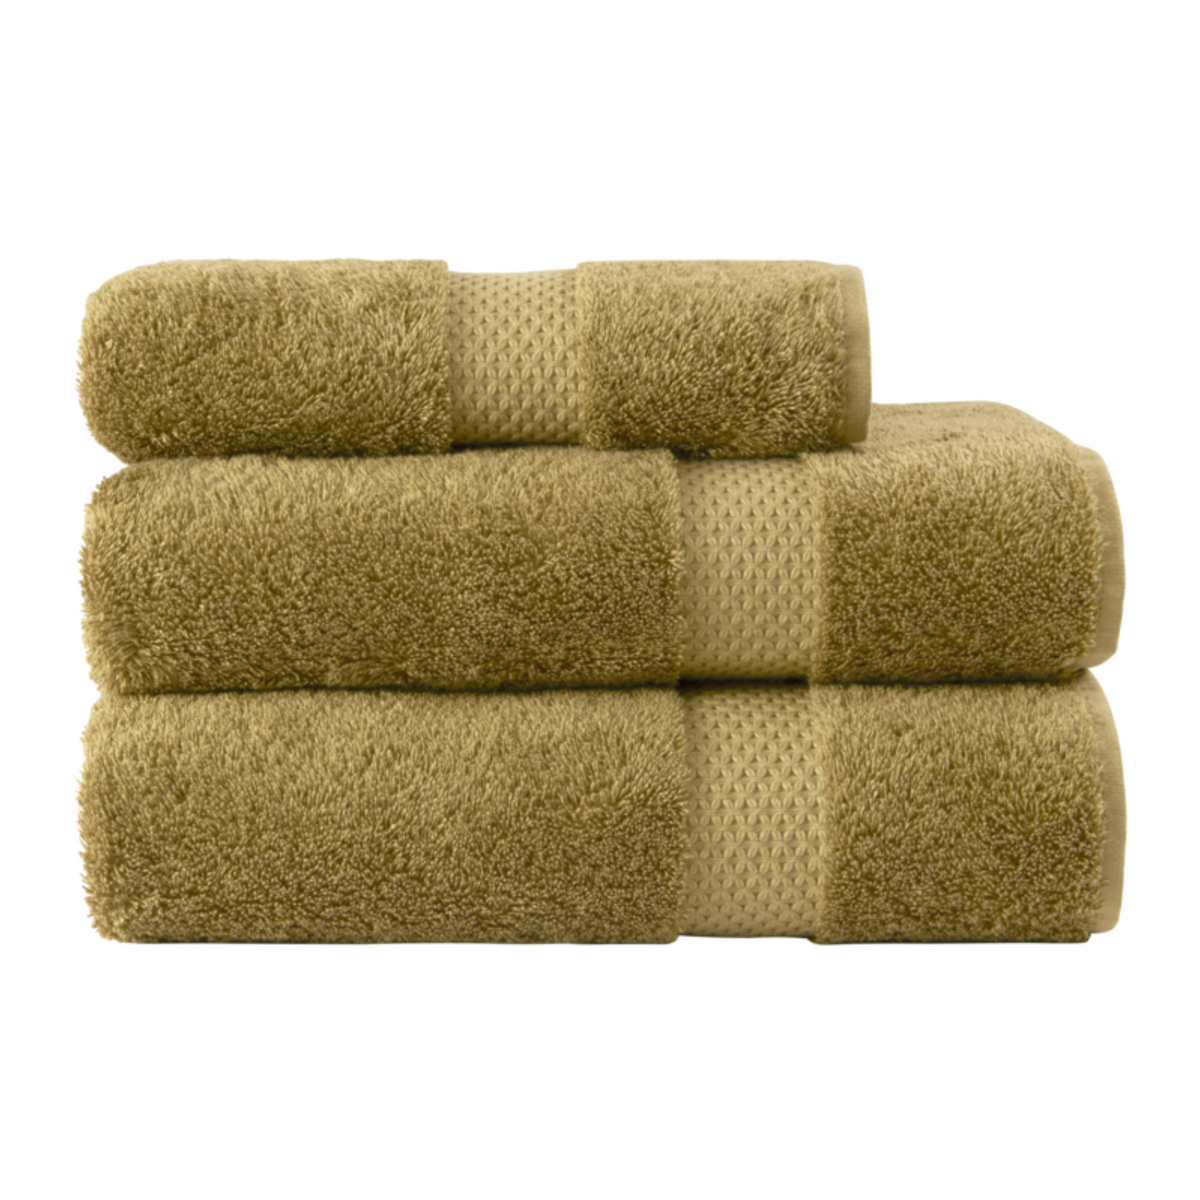 Stack of Folded Yves Delorme Etoile Bath Towels in Bronze Color